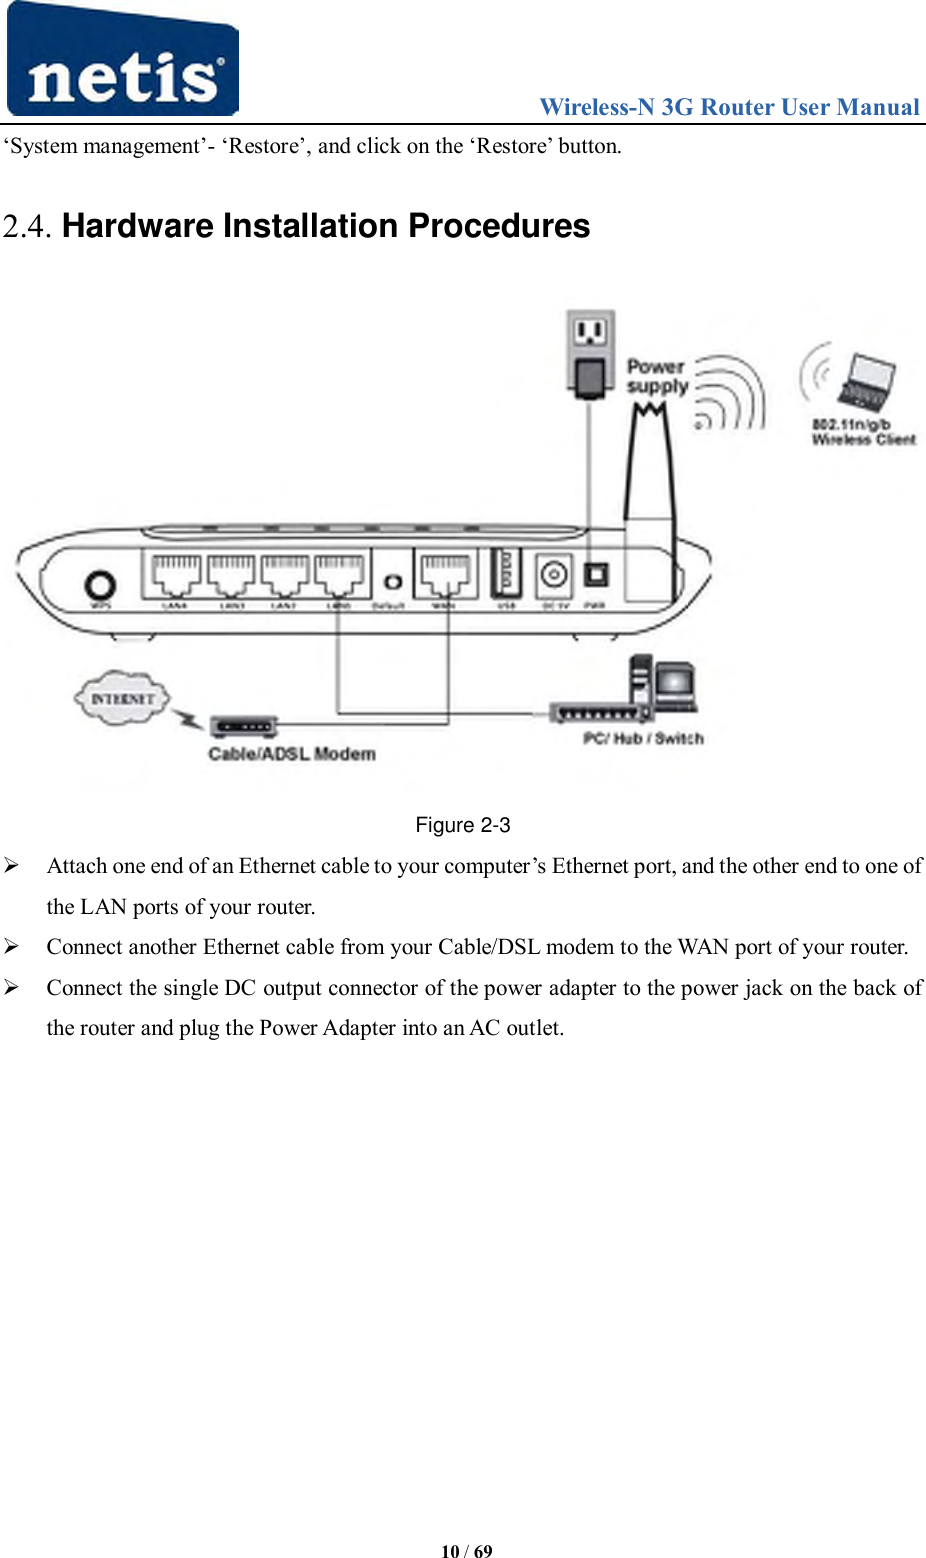                                 Wireless-N 3G Router User Manual  10 / 69 „System management‟- „Restore‟, and click on the „Restore‟ button. 2.4. Hardware Installation Procedures  Figure 2-3  Attach one end of an Ethernet cable to your computer‟s Ethernet port, and the other end to one of the LAN ports of your router.  Connect another Ethernet cable from your Cable/DSL modem to the WAN port of your router.  Connect the single DC output connector of the power adapter to the power jack on the back of the router and plug the Power Adapter into an AC outlet.    